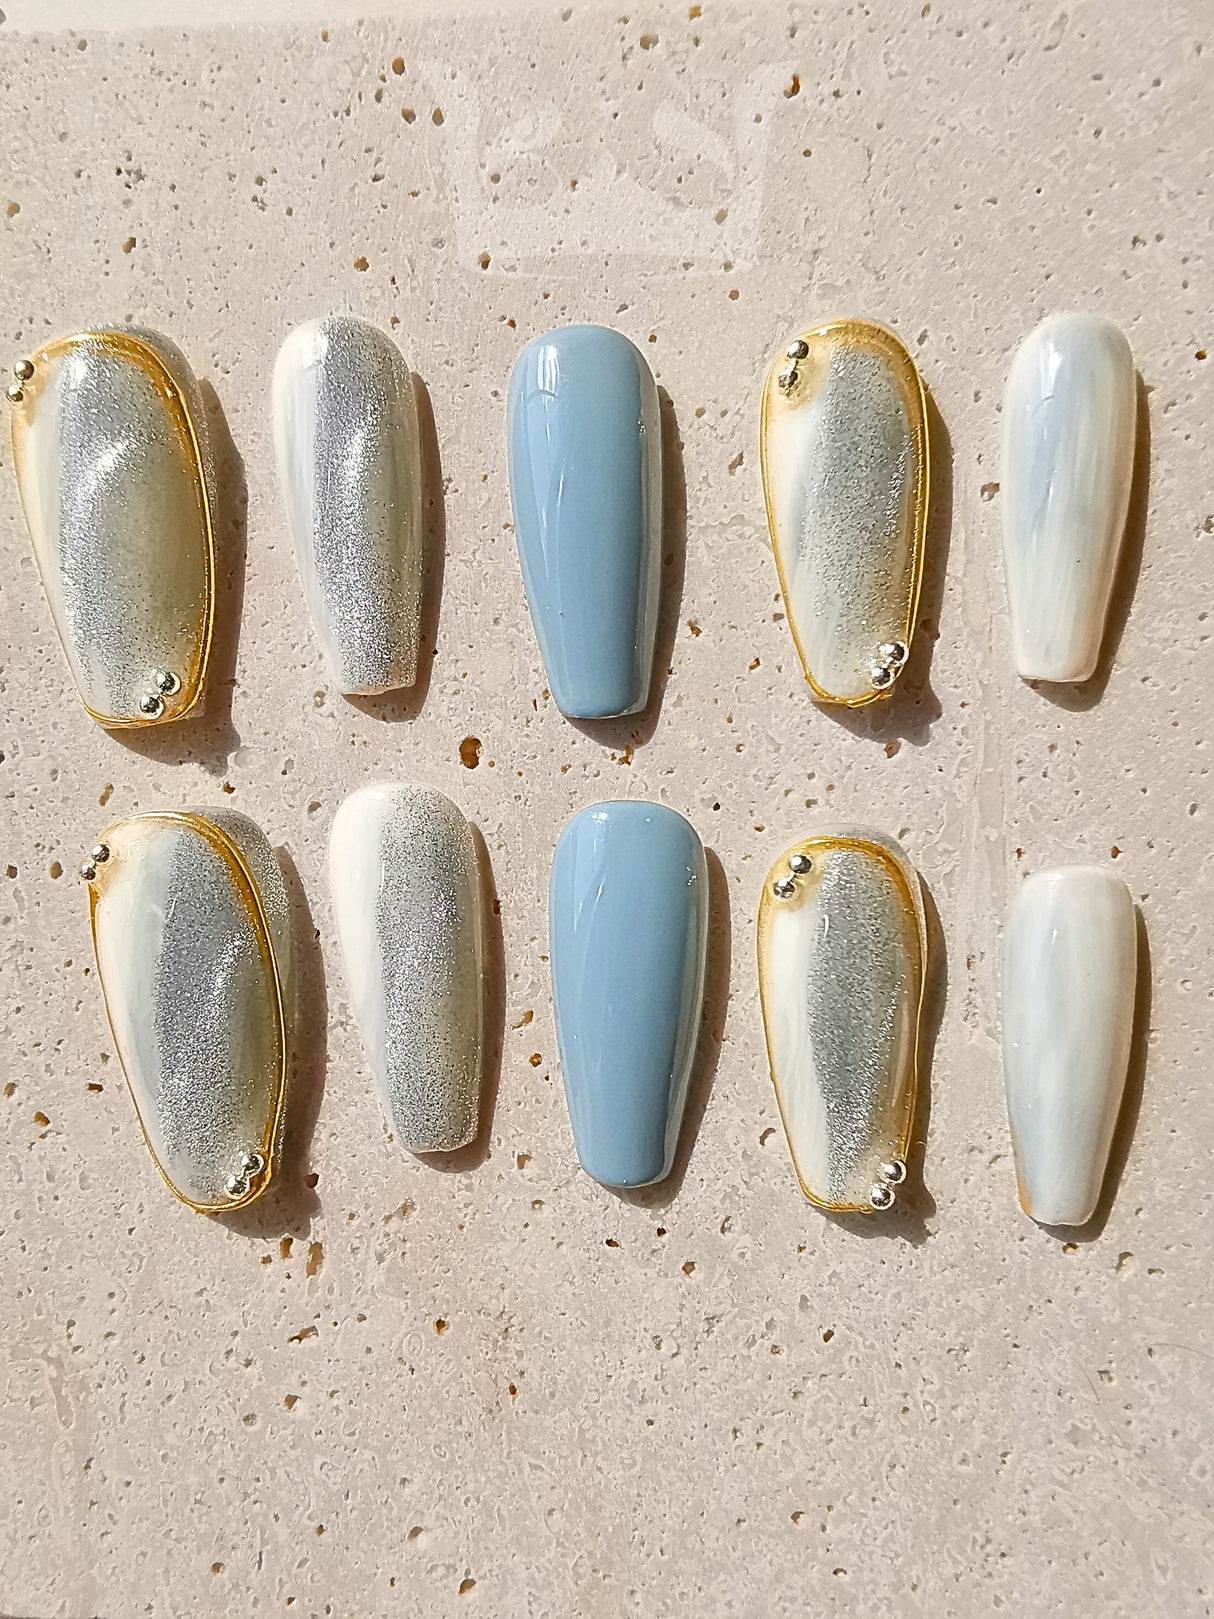 These press-on nails are perfect for a special occasion with a unique design featuring a two-tone effect, gold embellishments, and a coffin/ballerina shape. The glossy topcoat adds a polished finish.